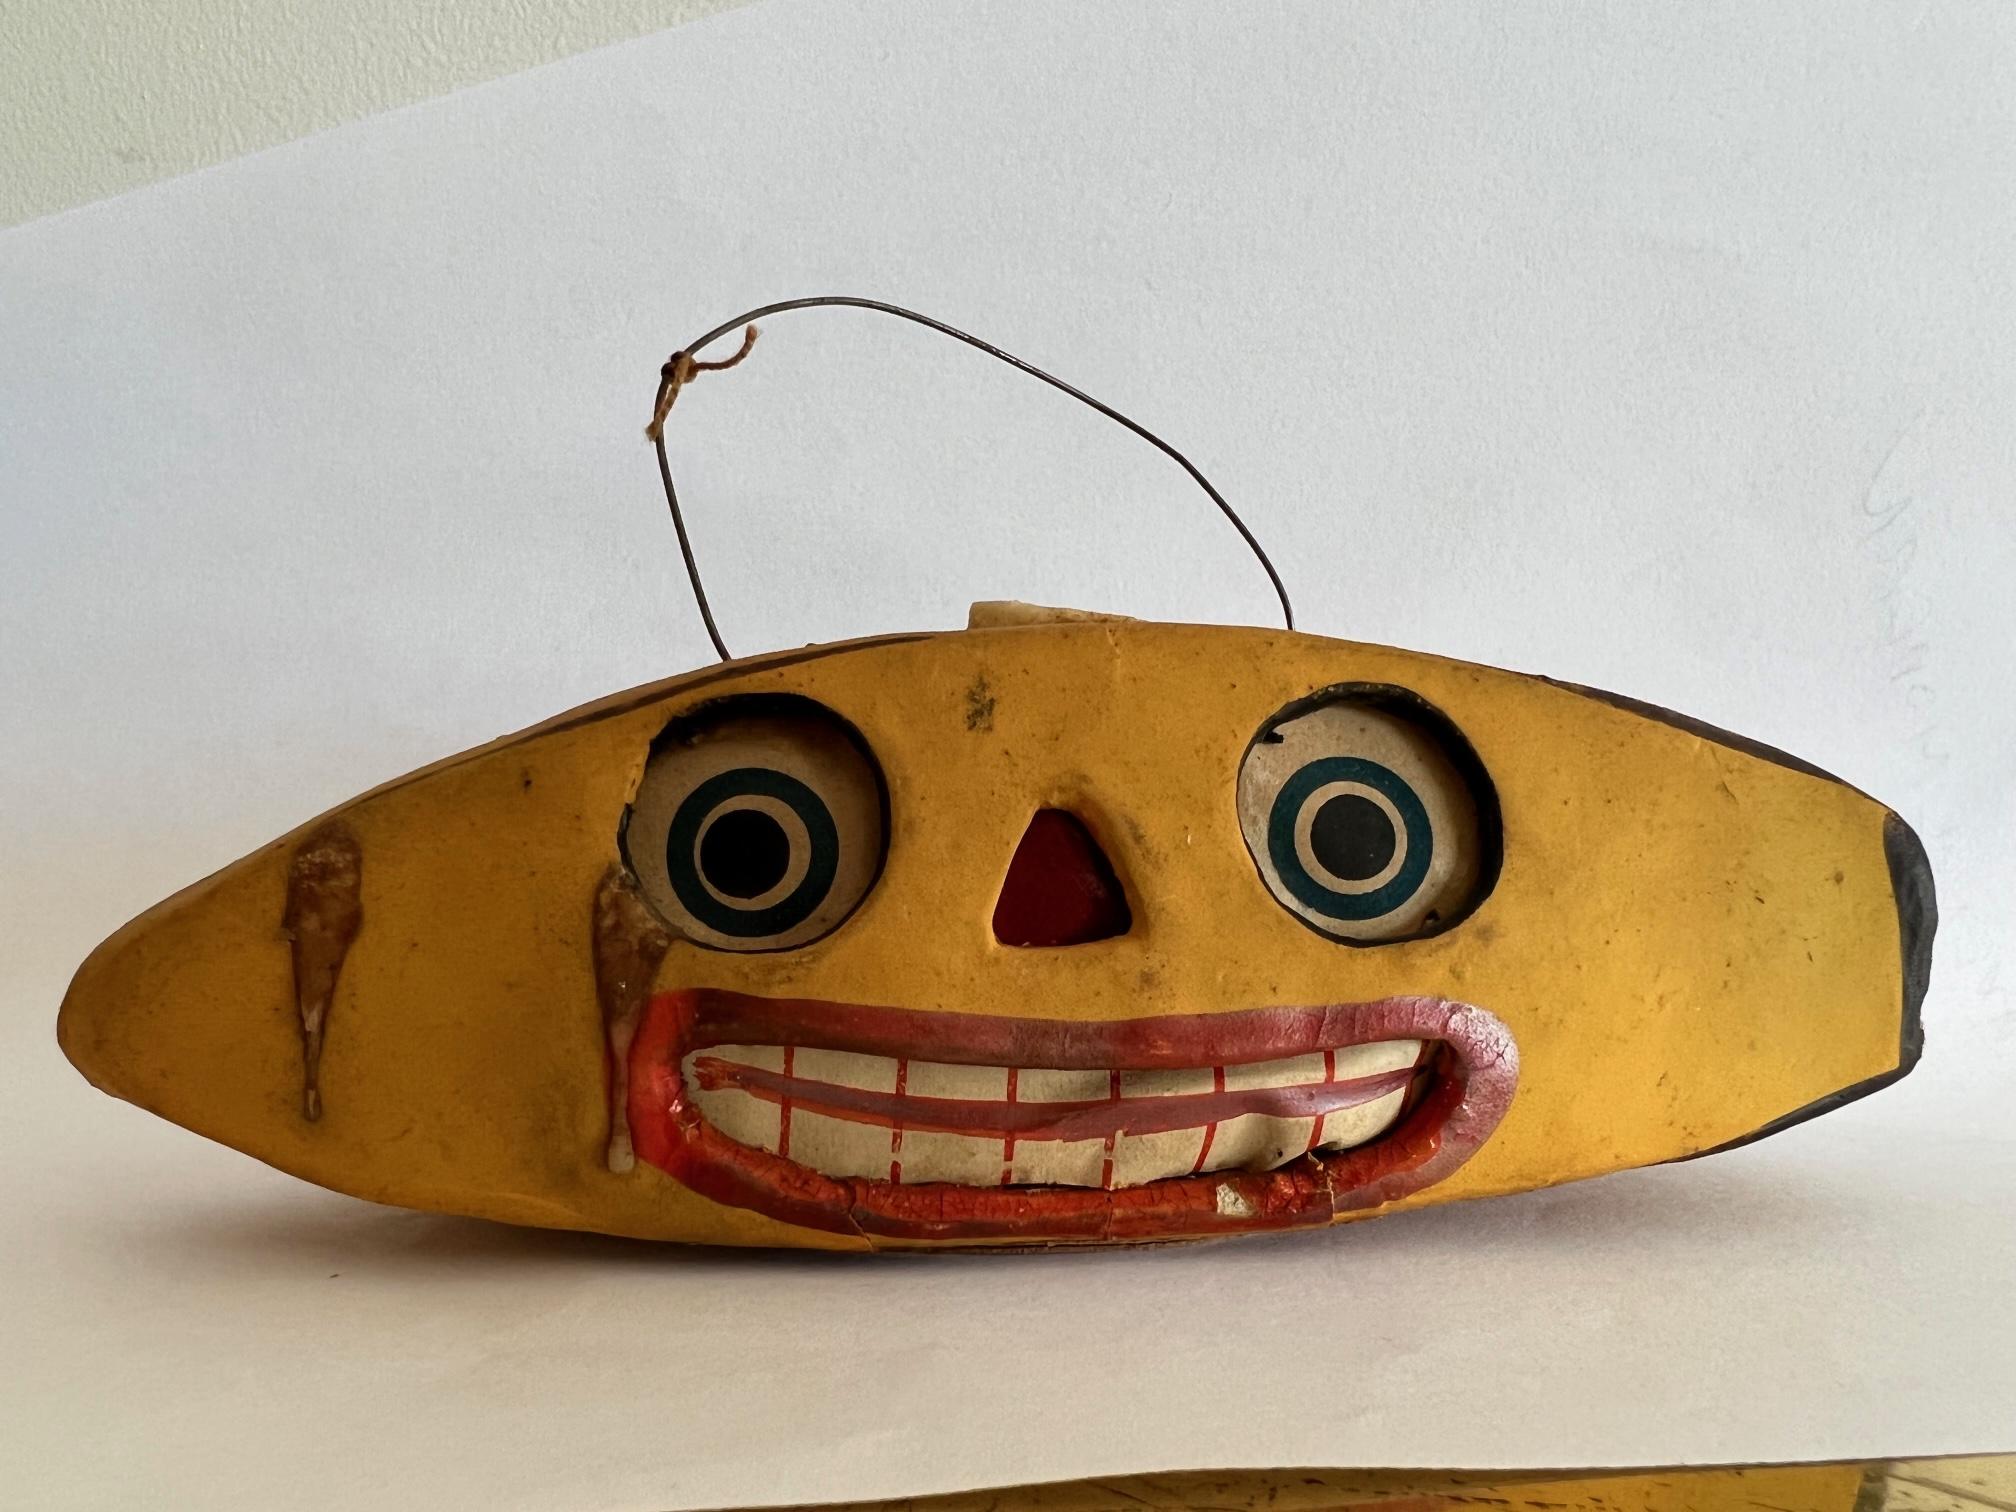 Unusual and rare Halloween lantern as banana face, made in Germany ca' 1930's. Papermache with original candle inside meant to be hung. Comical and spooky-folk art.